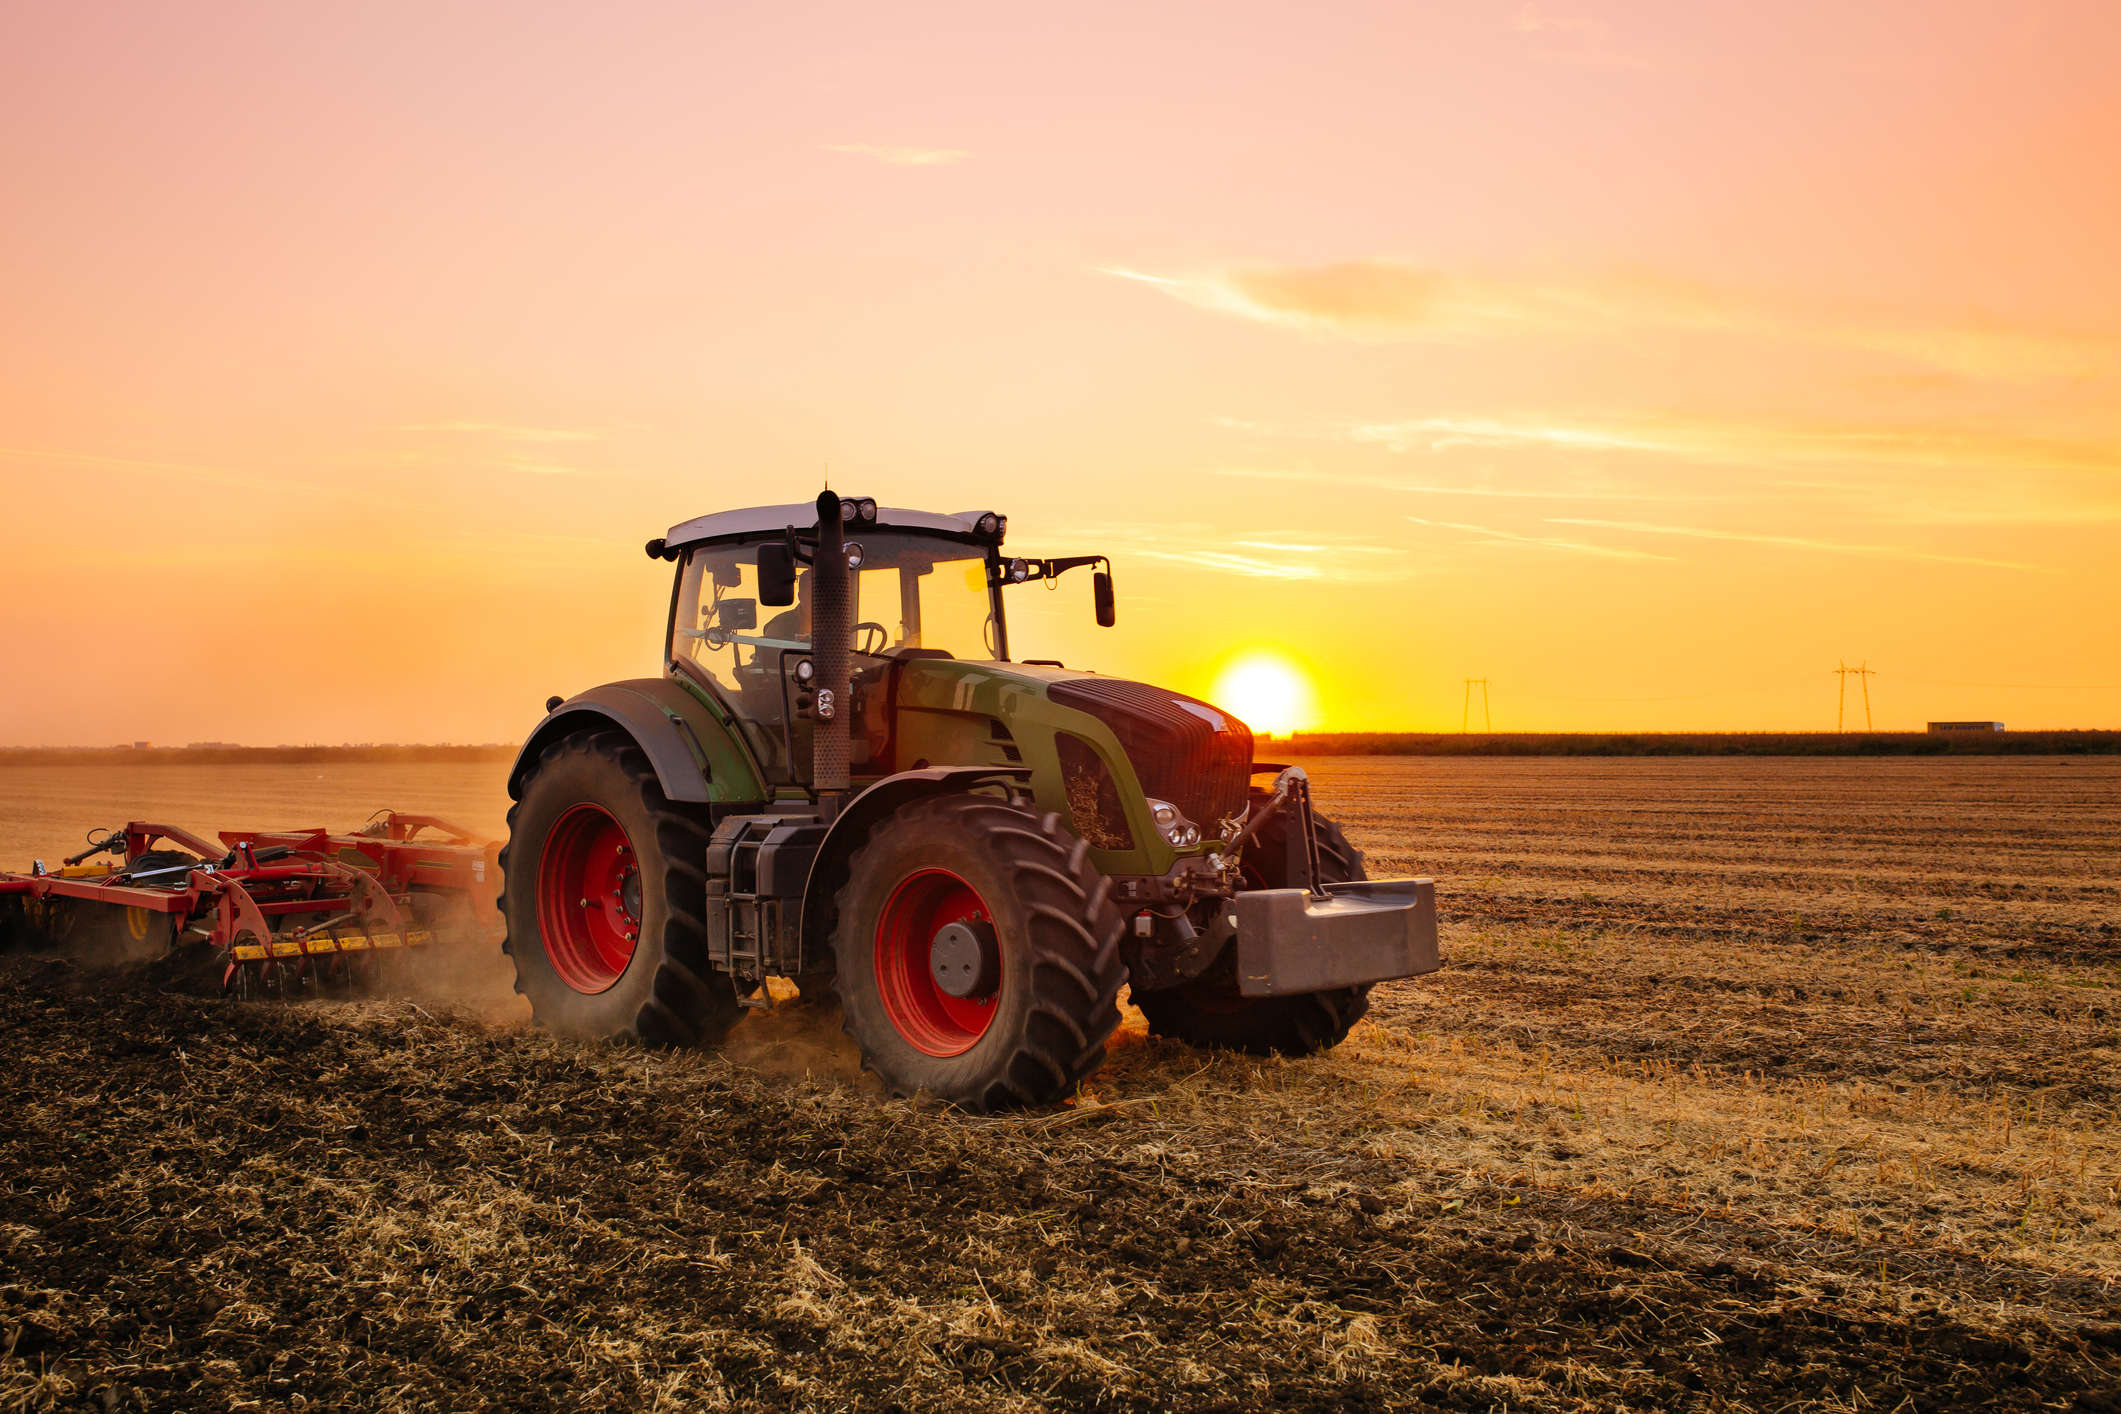 About 70% of the tractor sales happen in 10 states including Maharashtra, Uttar Pradesh and Madhya Pradesh, where the COVID-cases are highest. 